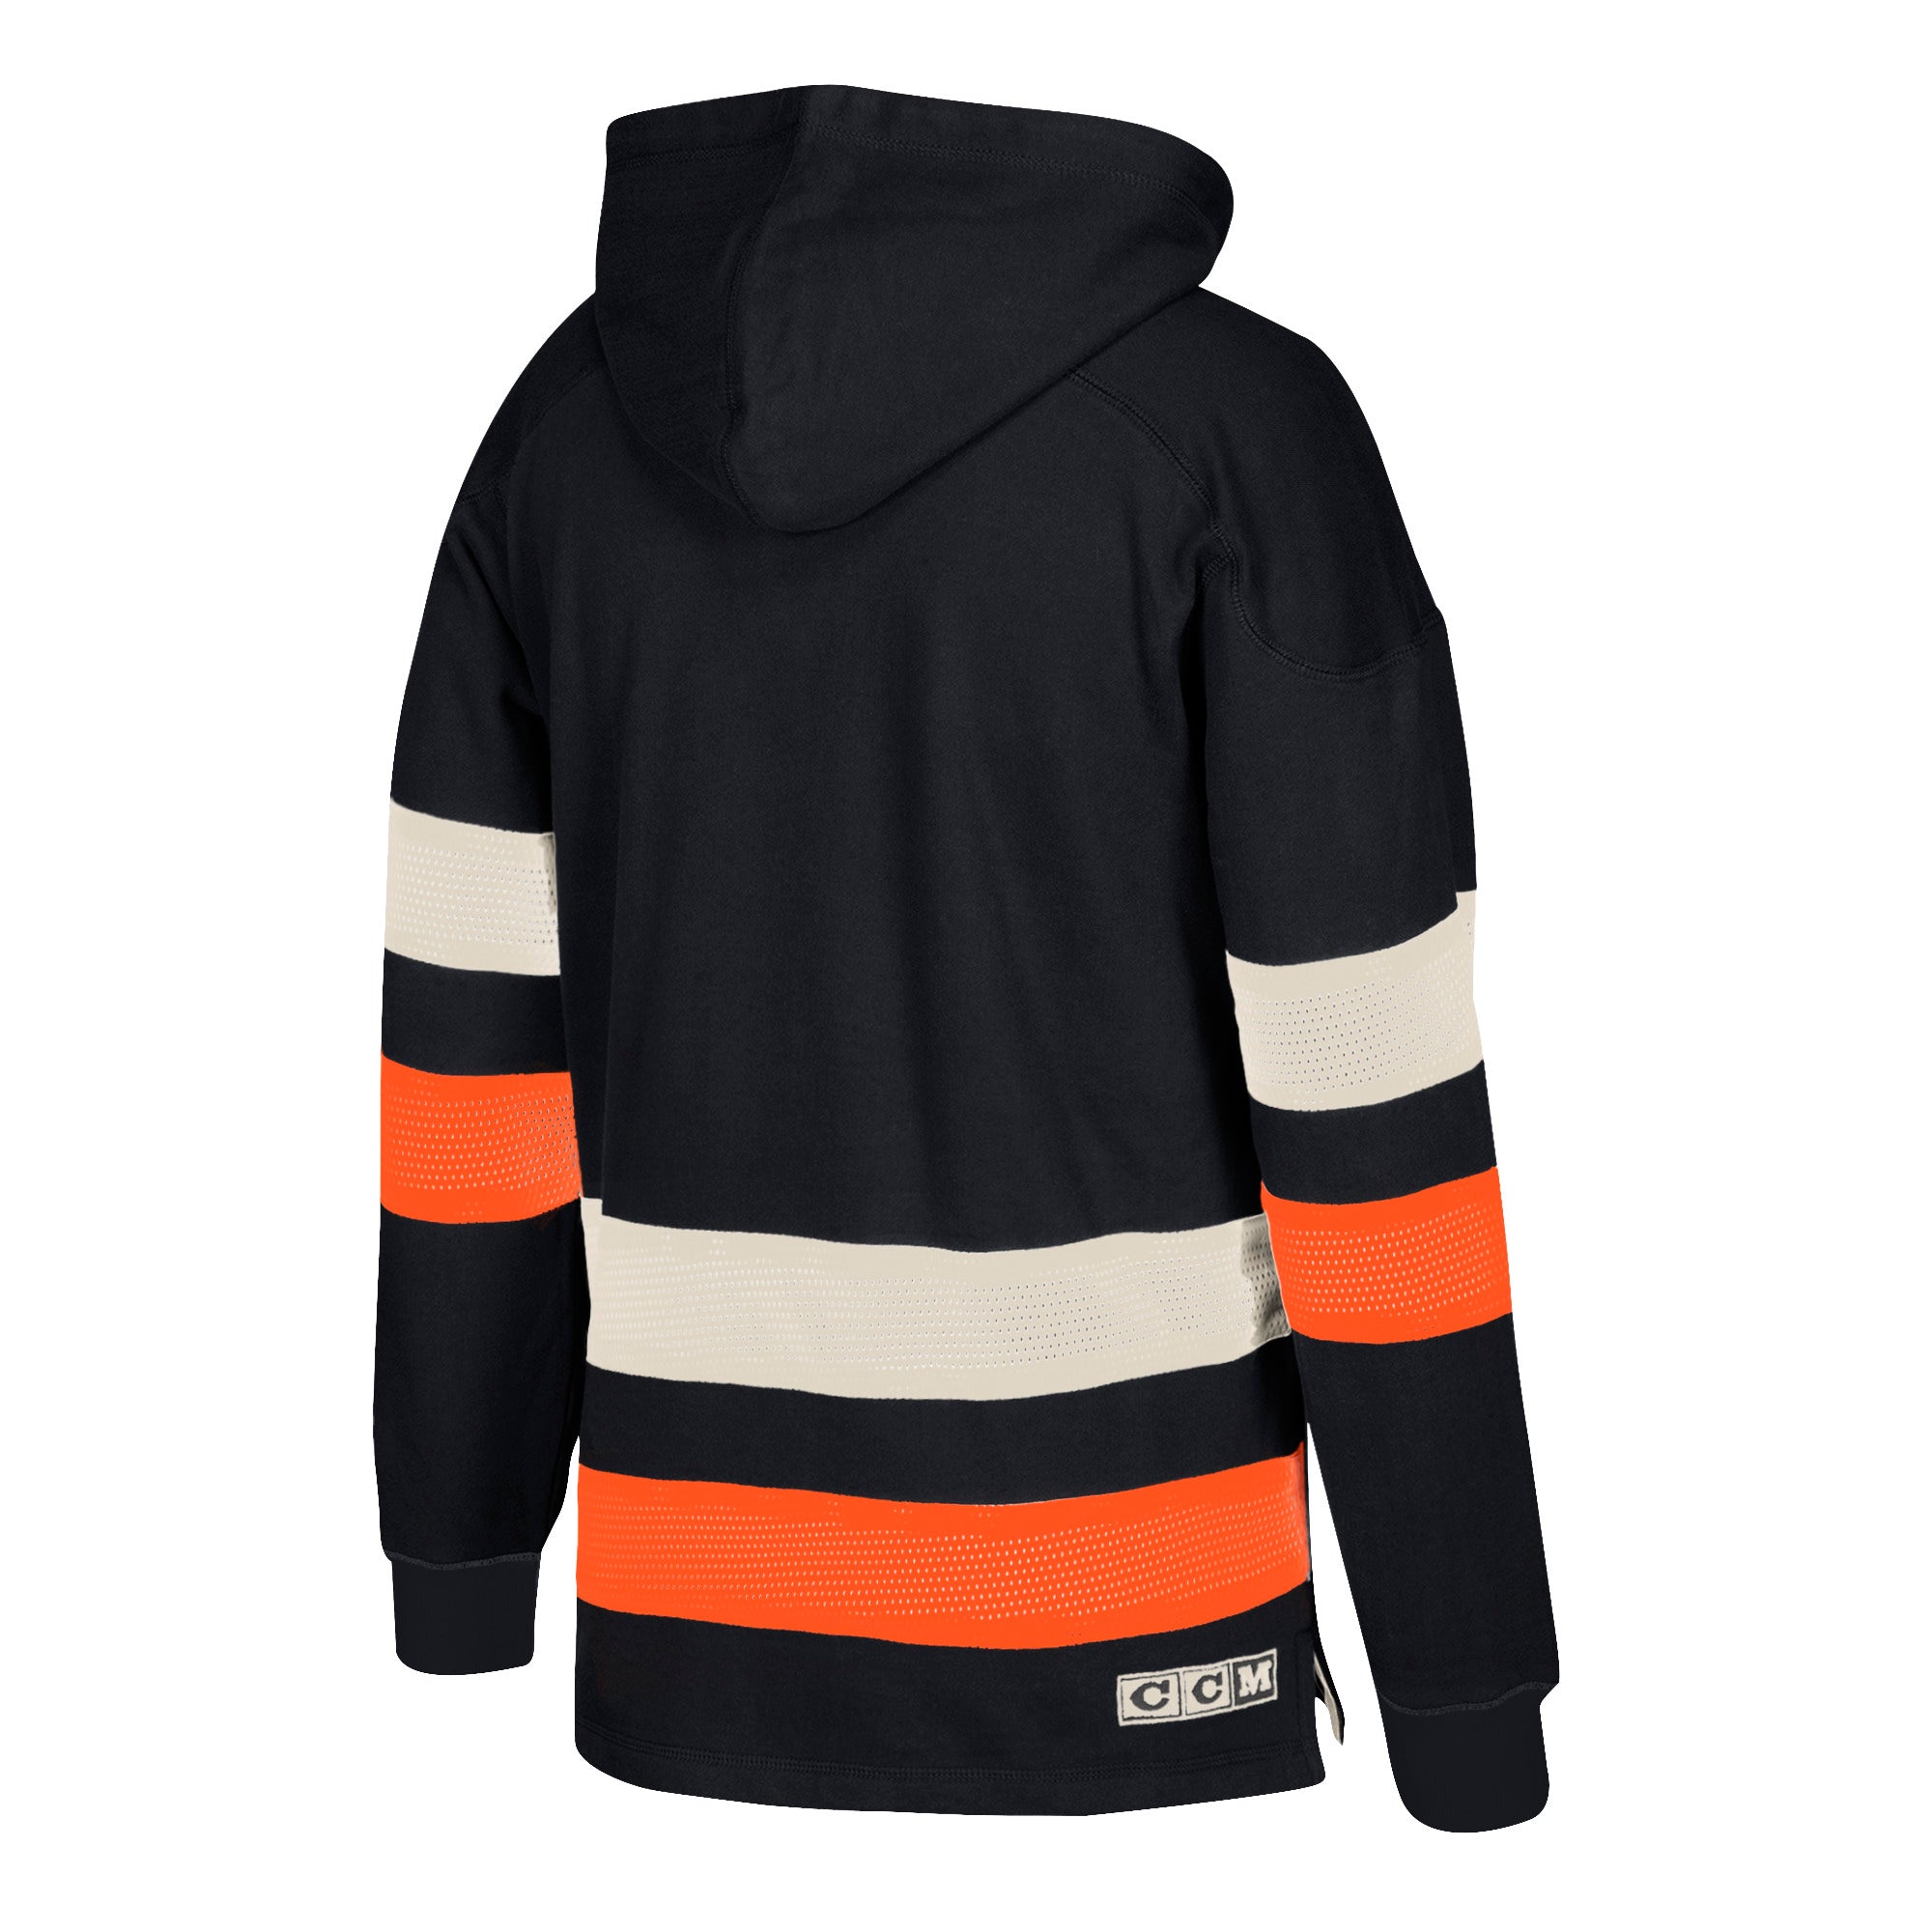 Youth Anaheim Ducks Black Lace 'Em Pullover Hoodie